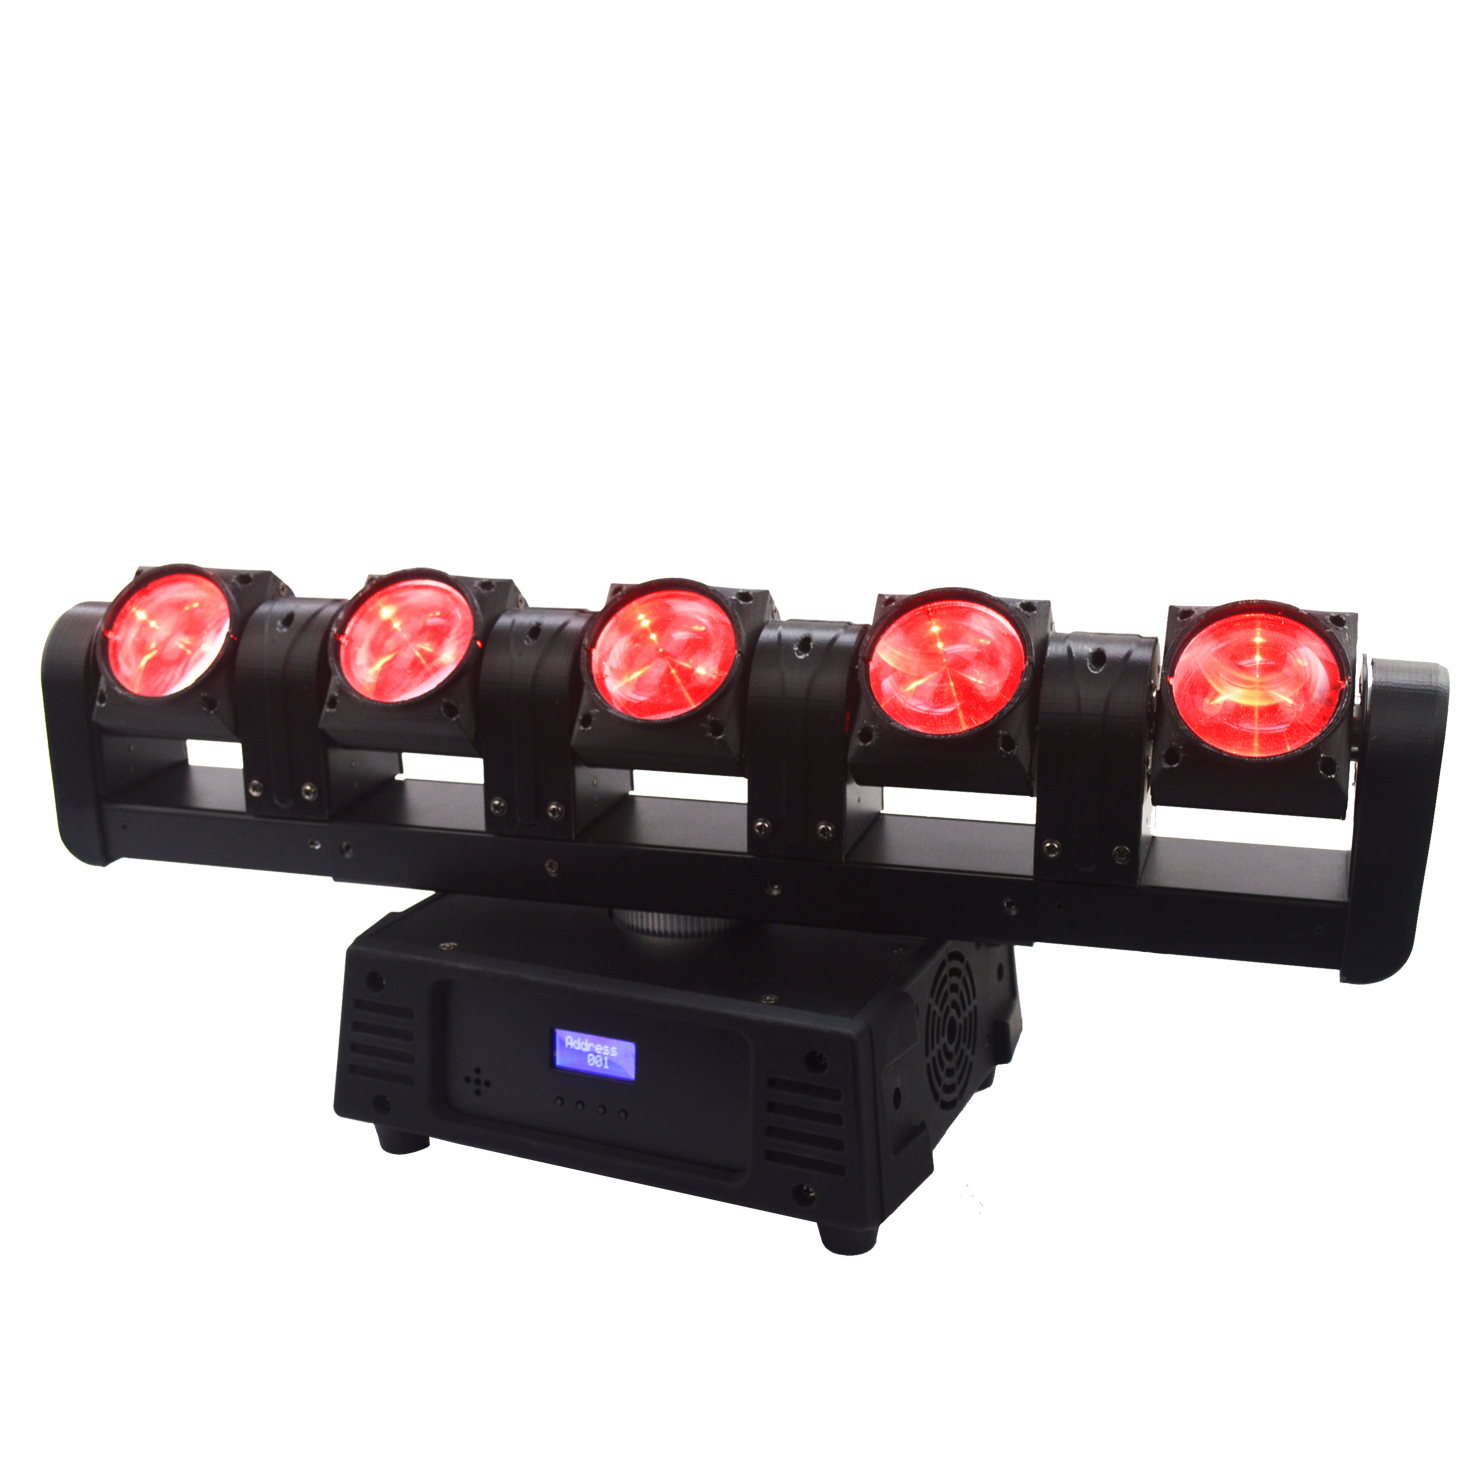 5 Heads Rogue RGBW 4in1 Led Moving Head Bar Light